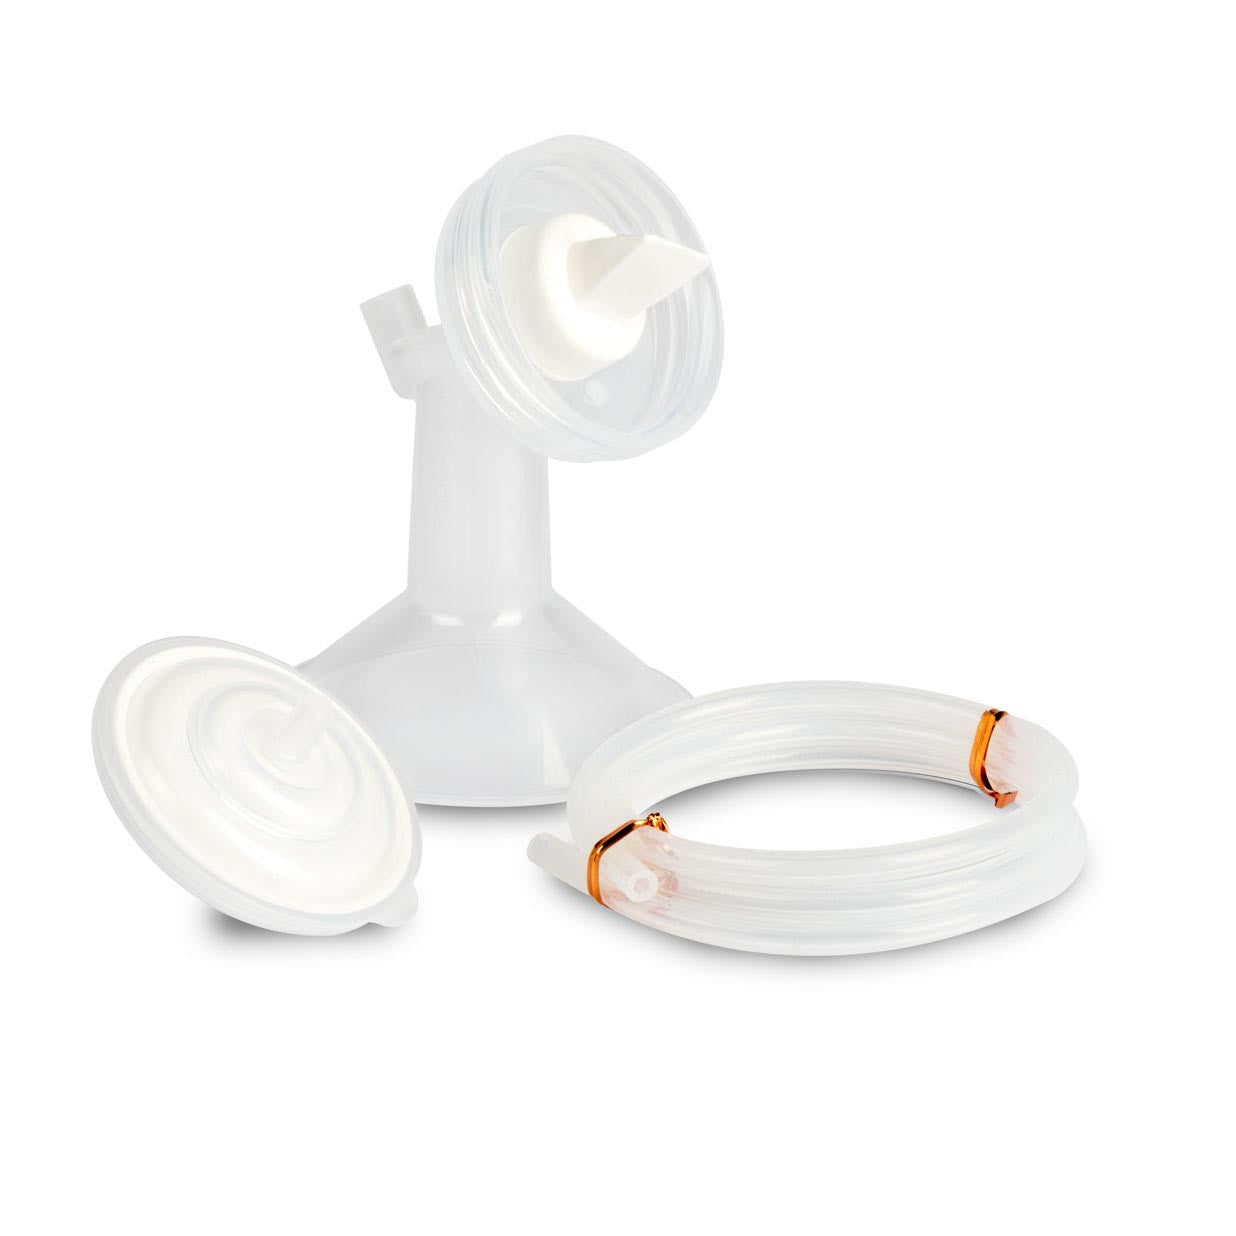 spectra s2 breast pump assembly